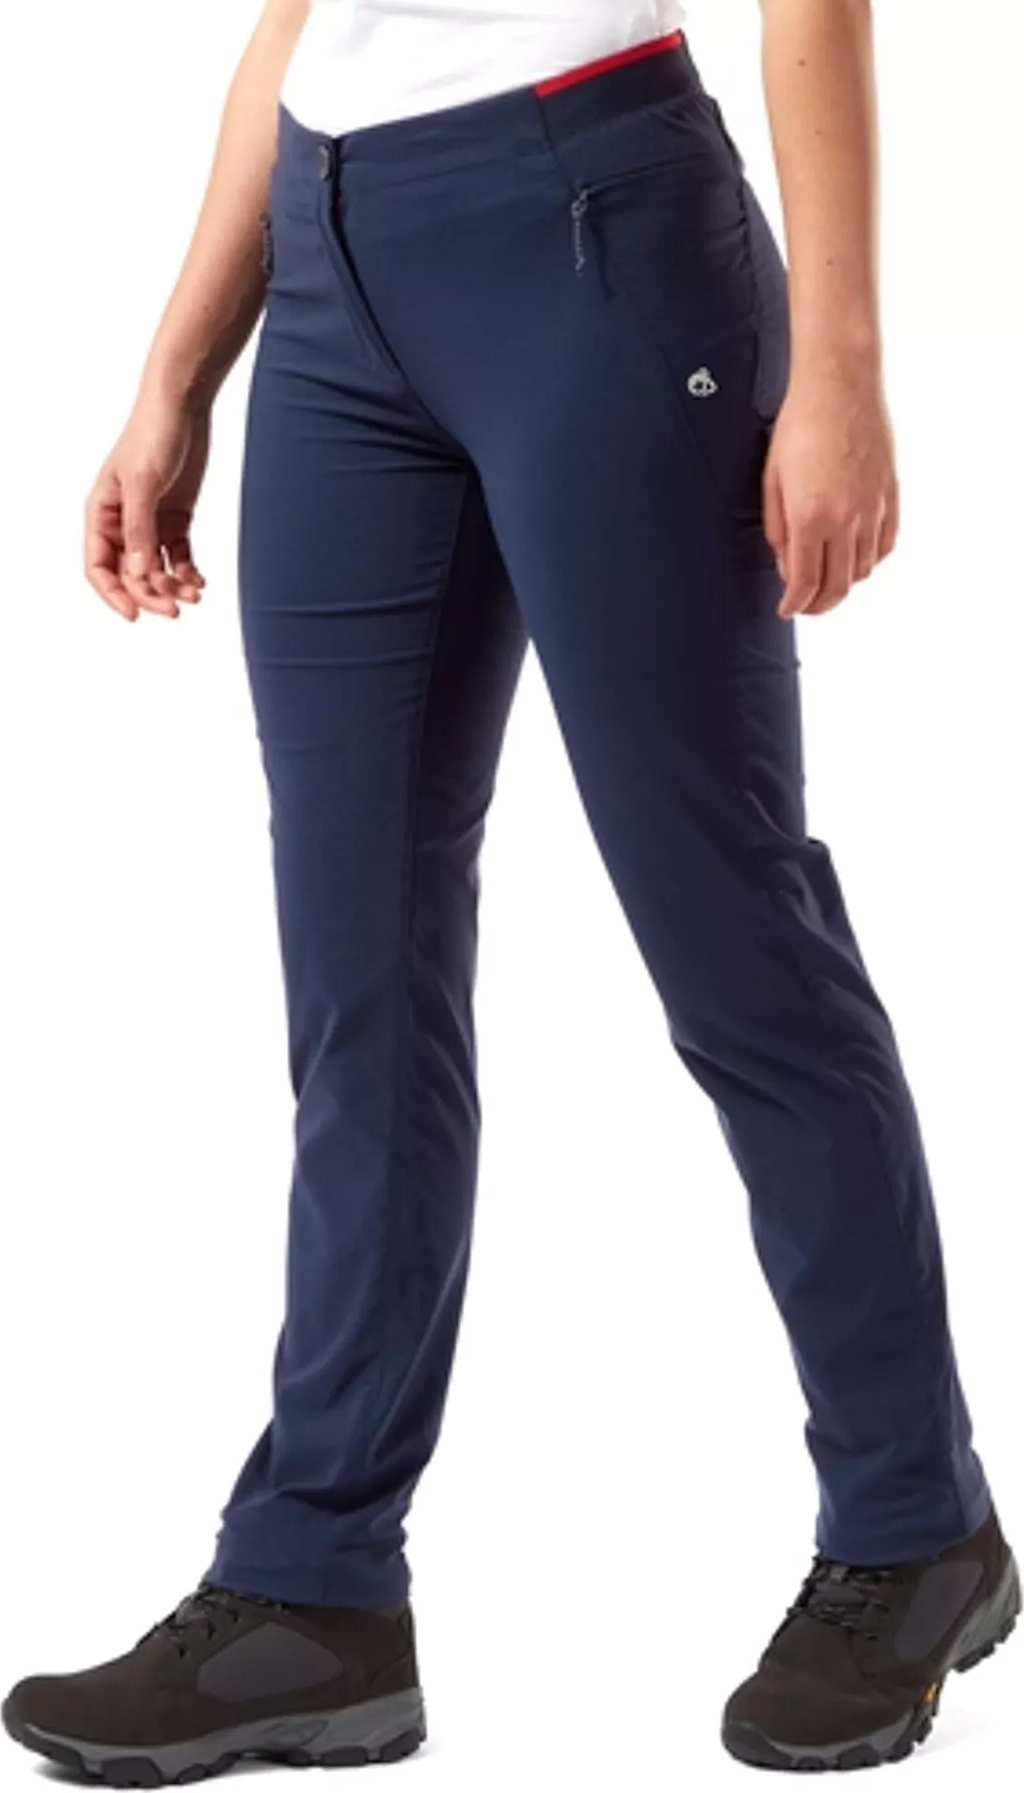 Craghoppers Women’s Nosilife Pro Active Trousers Regular Blue Navy